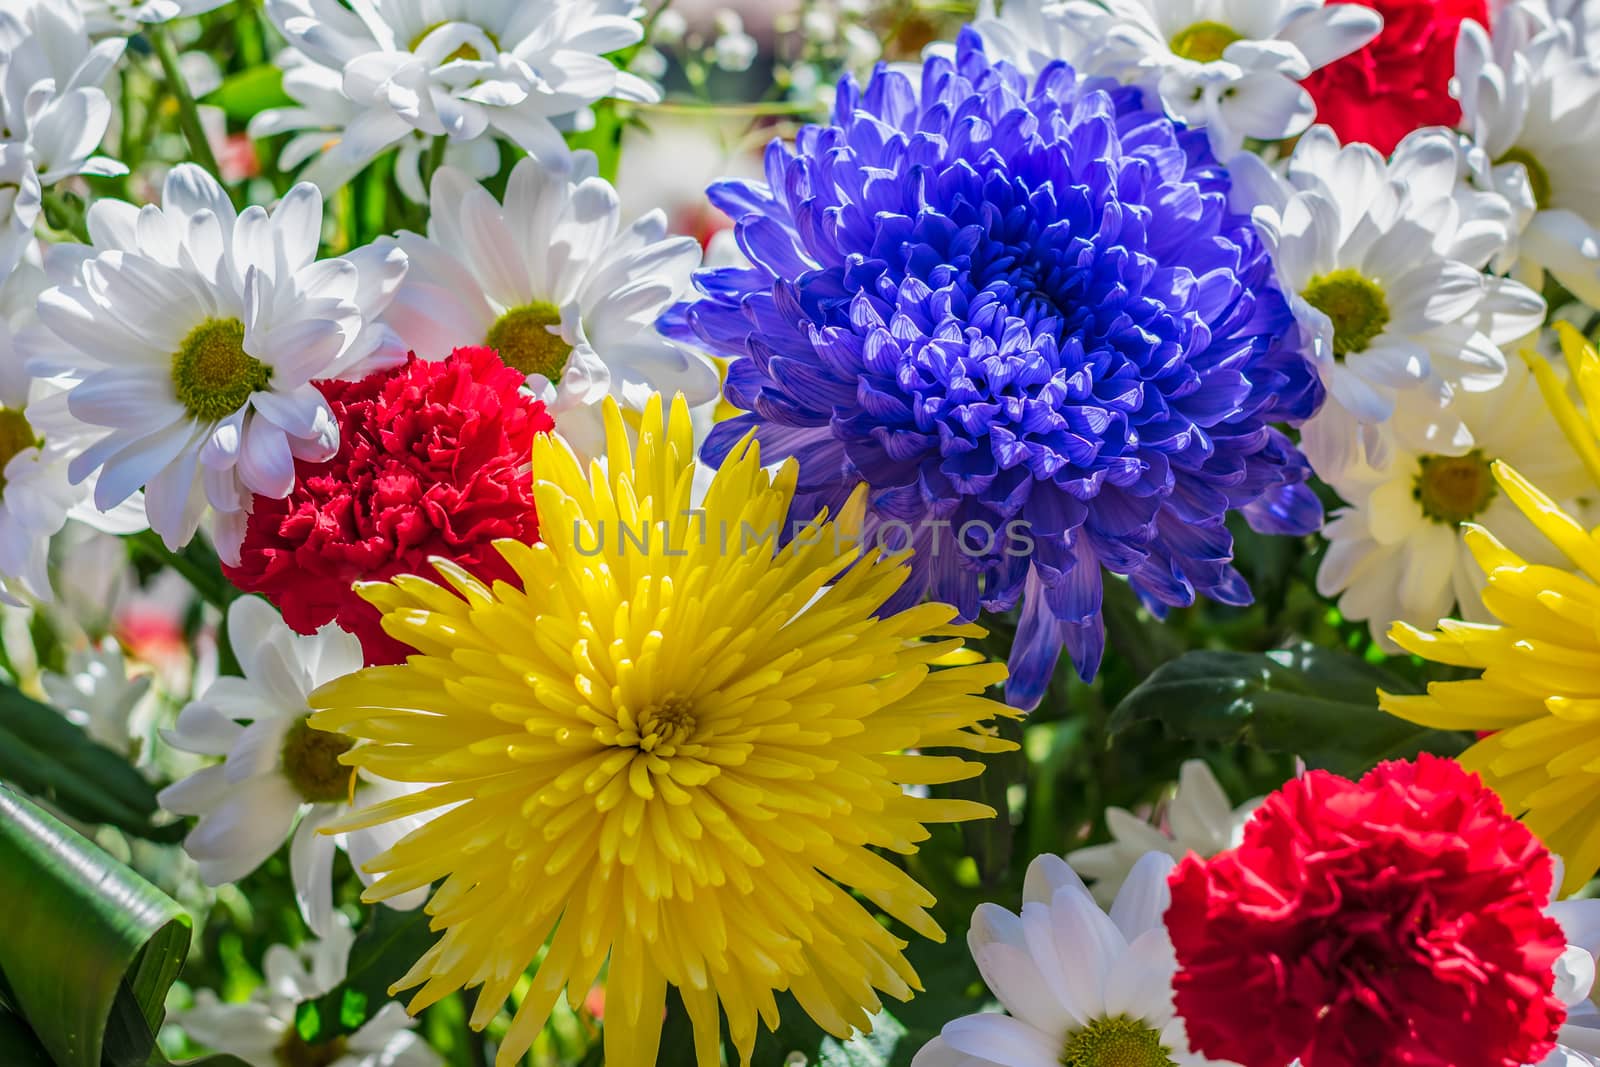 Bright and beautiful flowers of dahlias, chrysanthemums and carnations, of different colors, bloom in the garden by Skaron